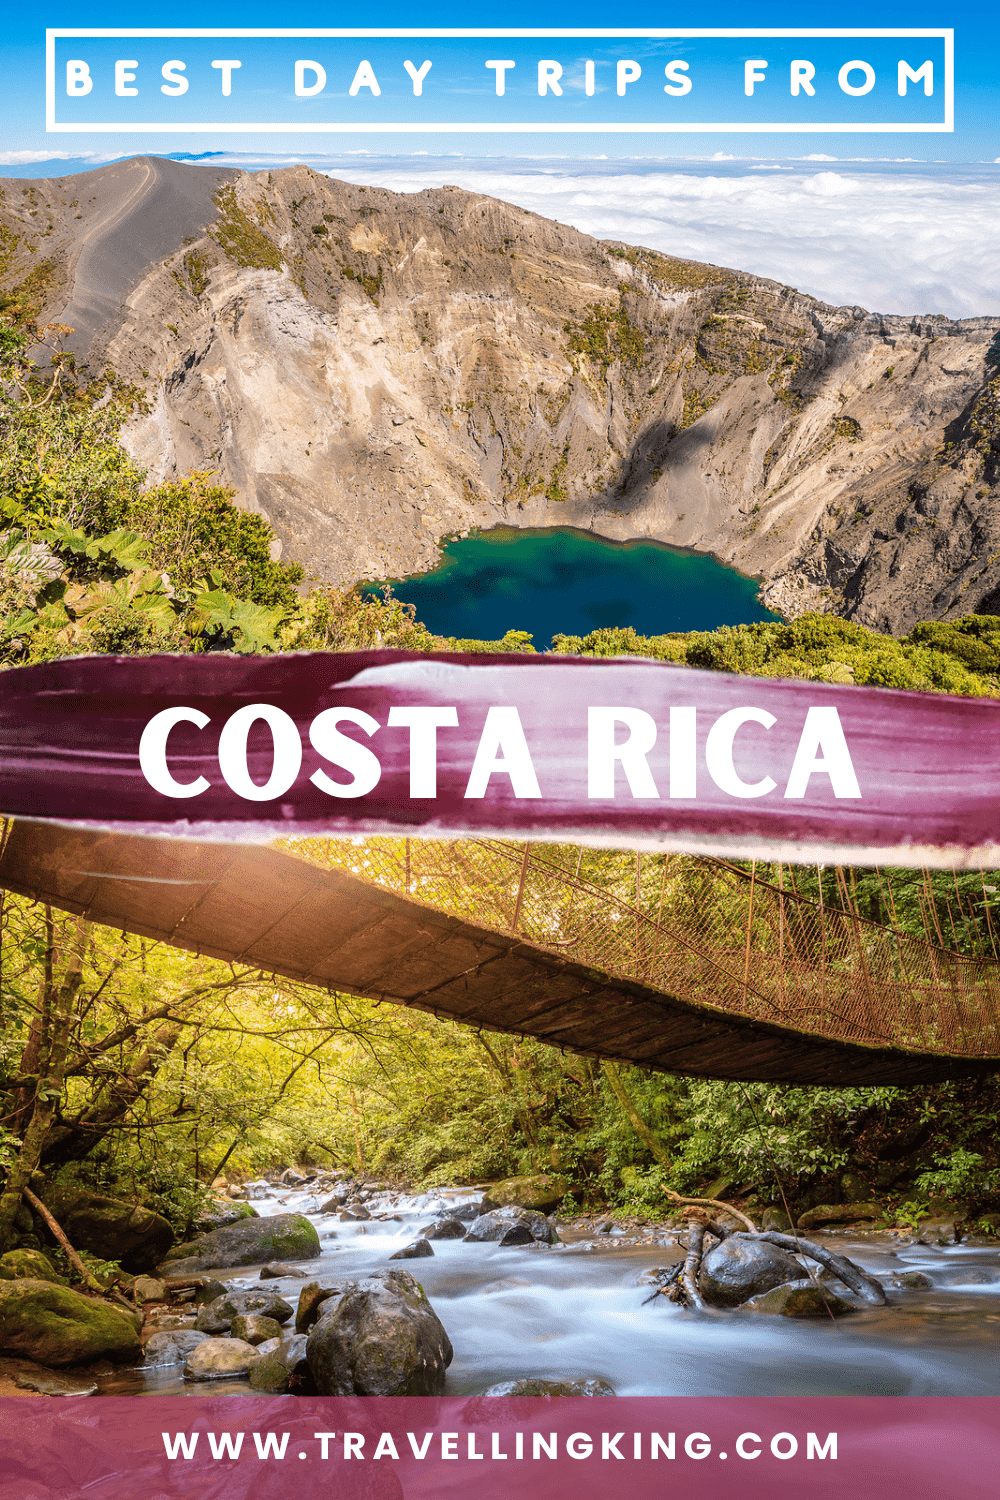 Best Day Trips from Costa Rica